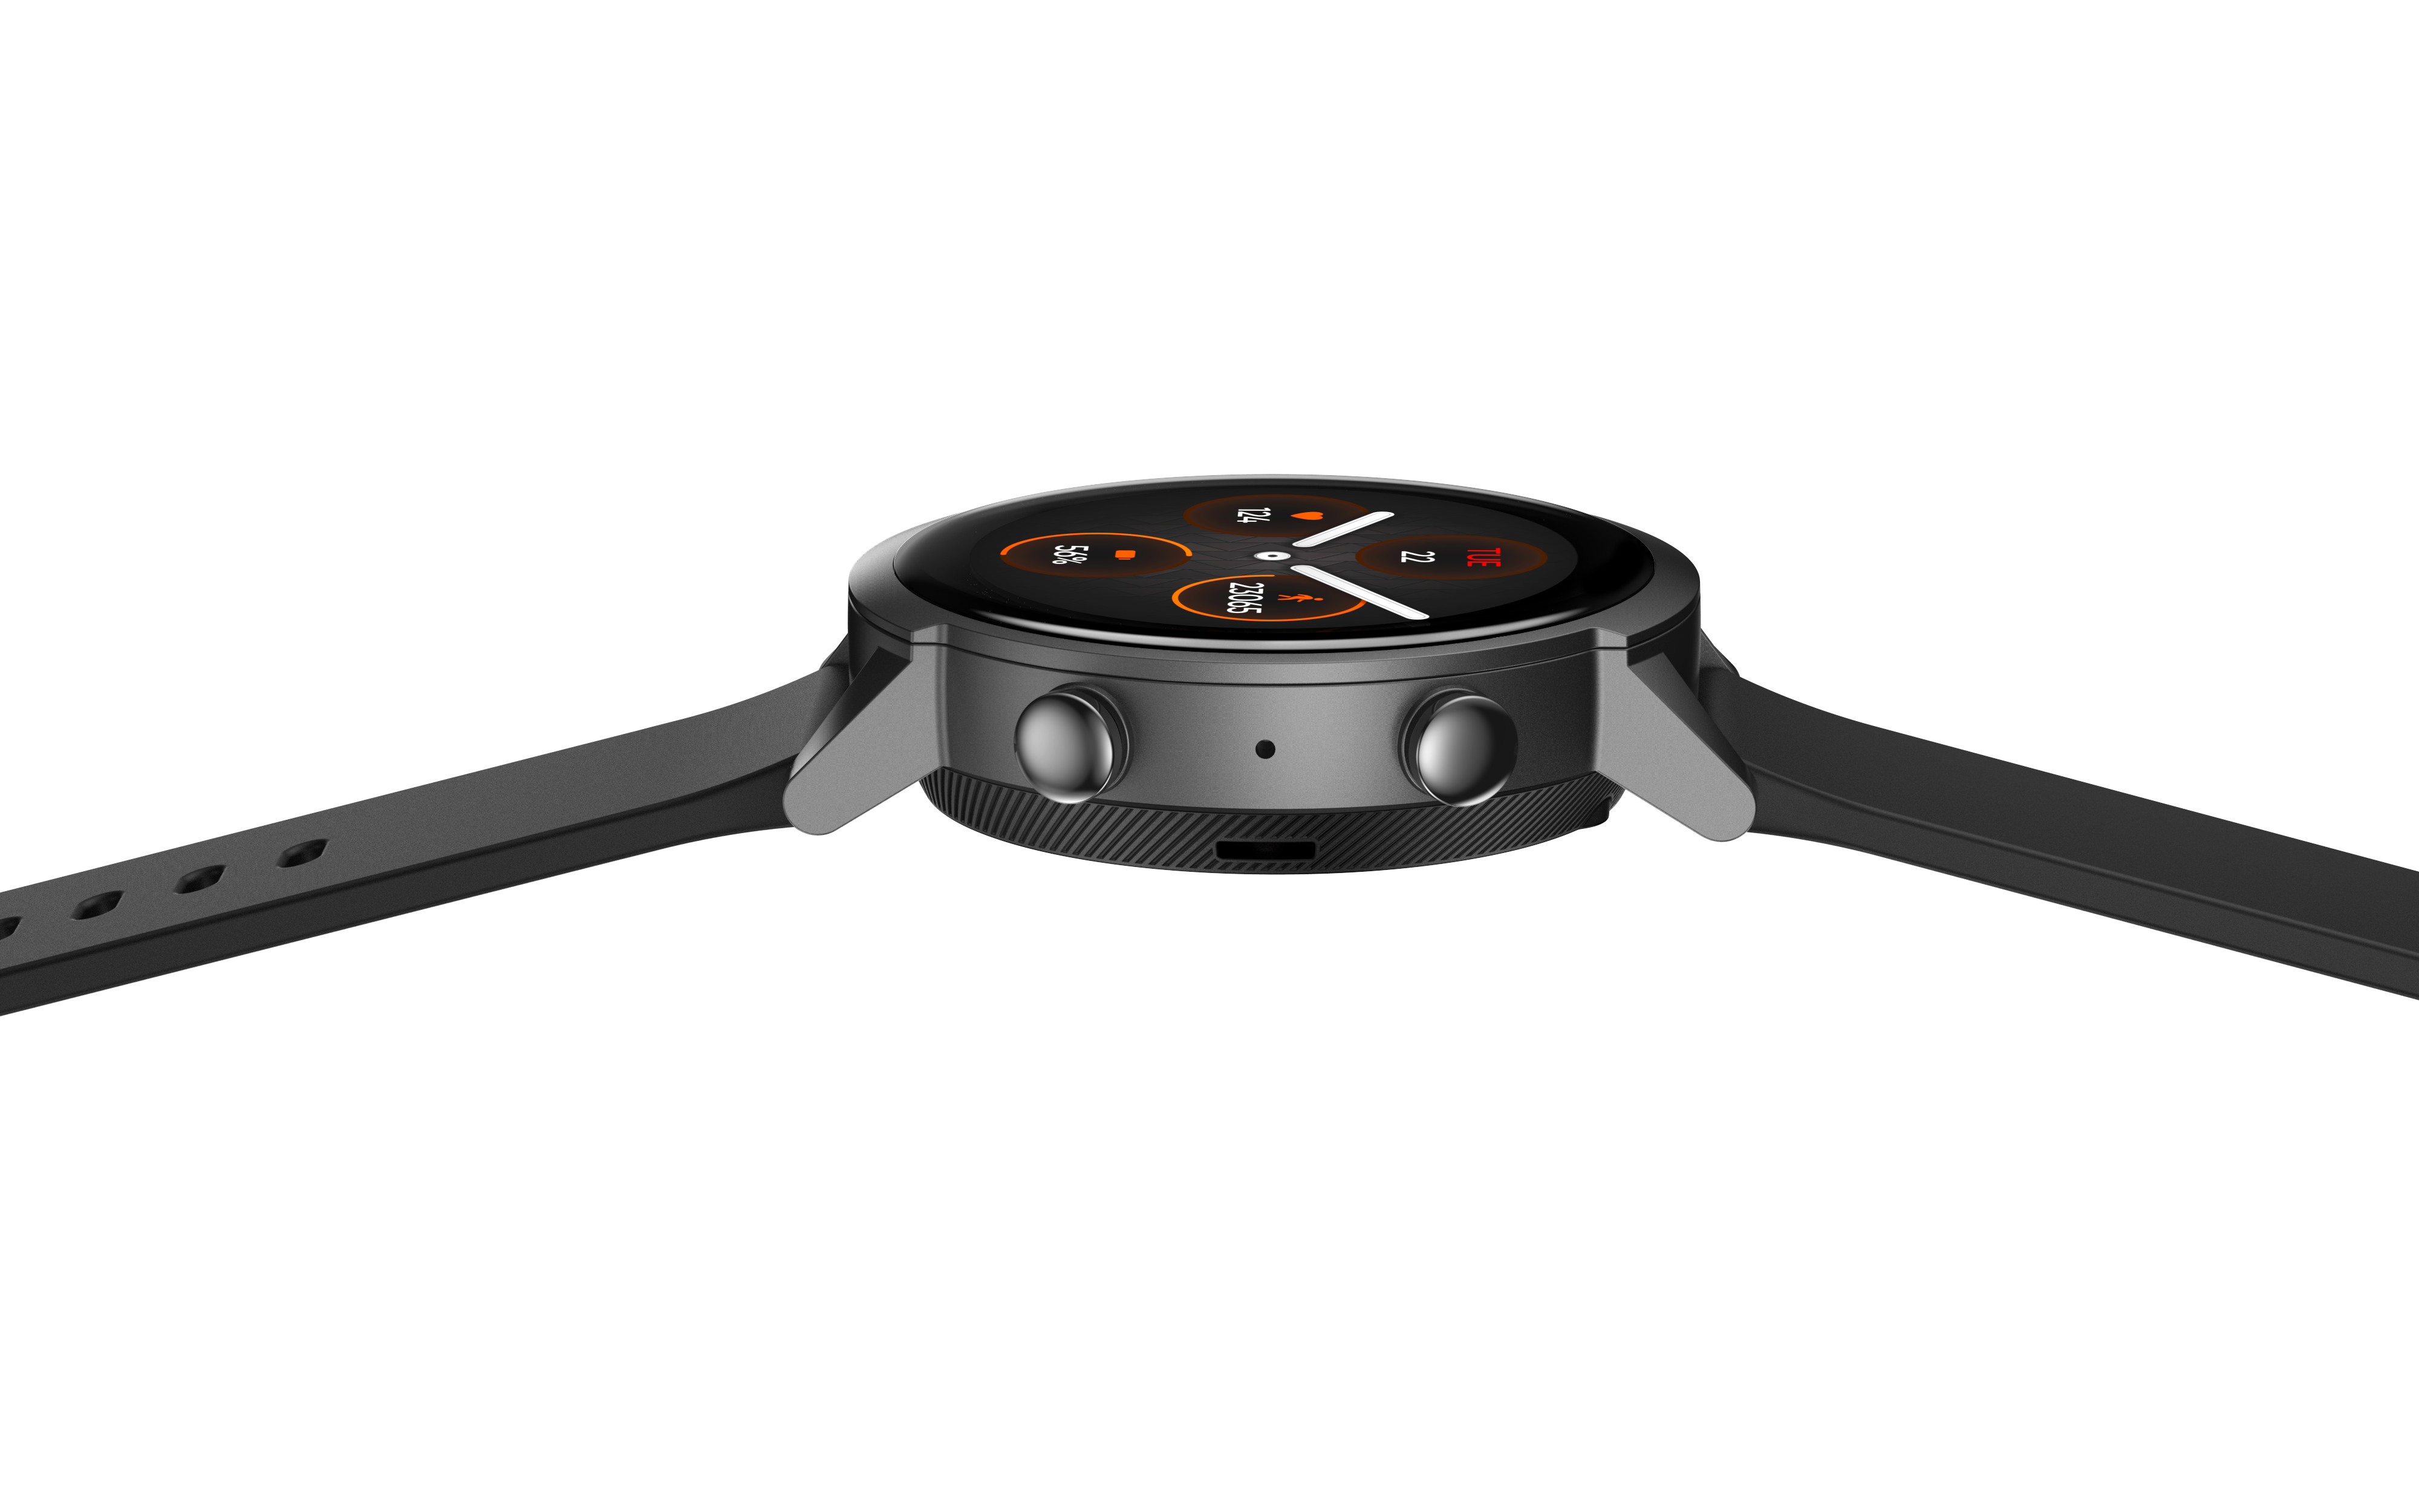 TicWatch E3 launches w/ Wear 4100, Wear OS, $199 price - 9to5Google